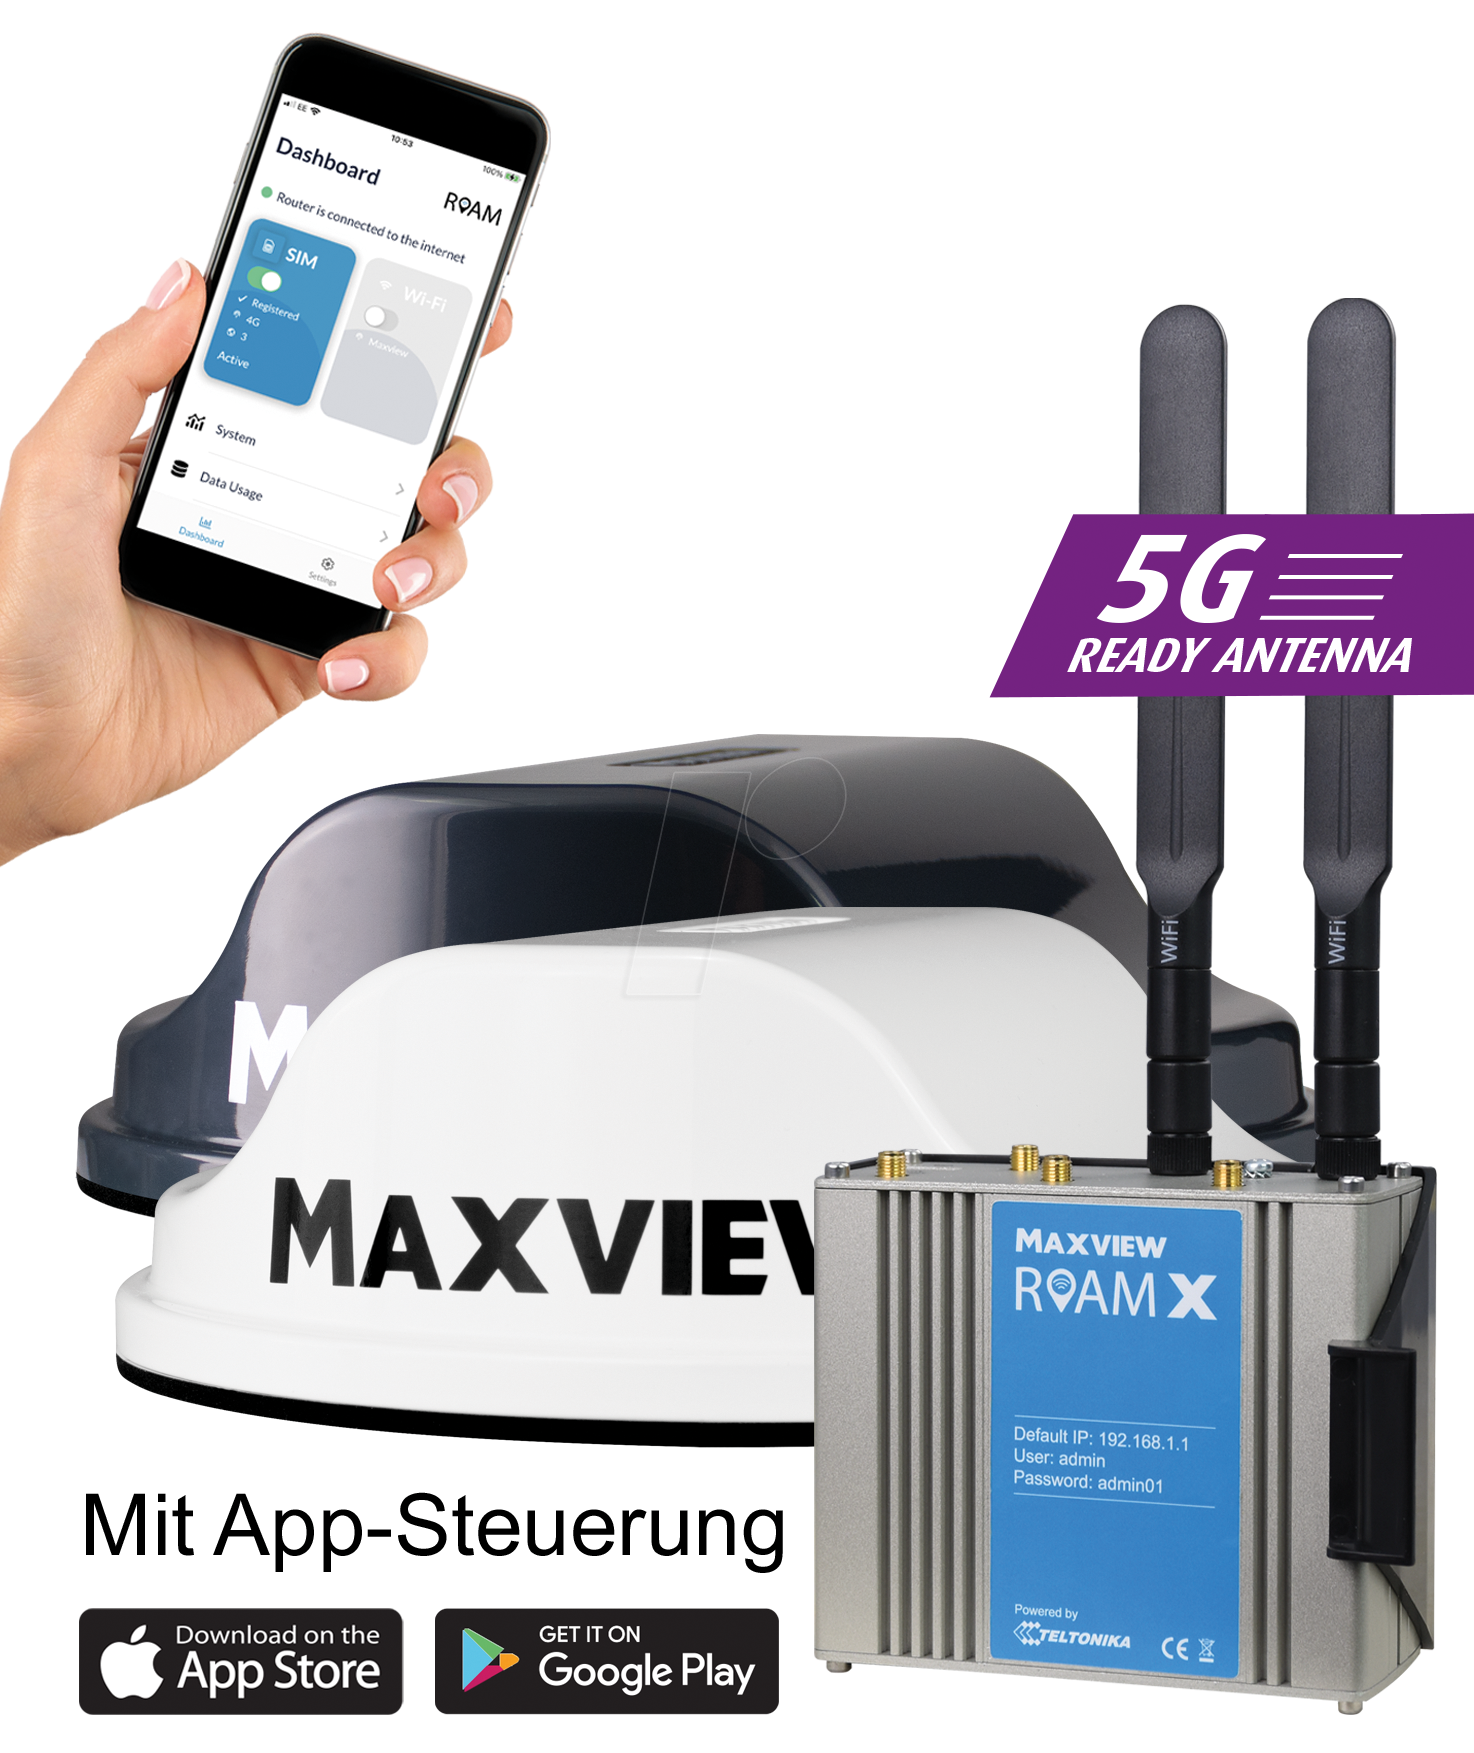 MAXVIEW 40009A - Camping / Boot WLAN-Router 4G 300 MBit/s von Maxview